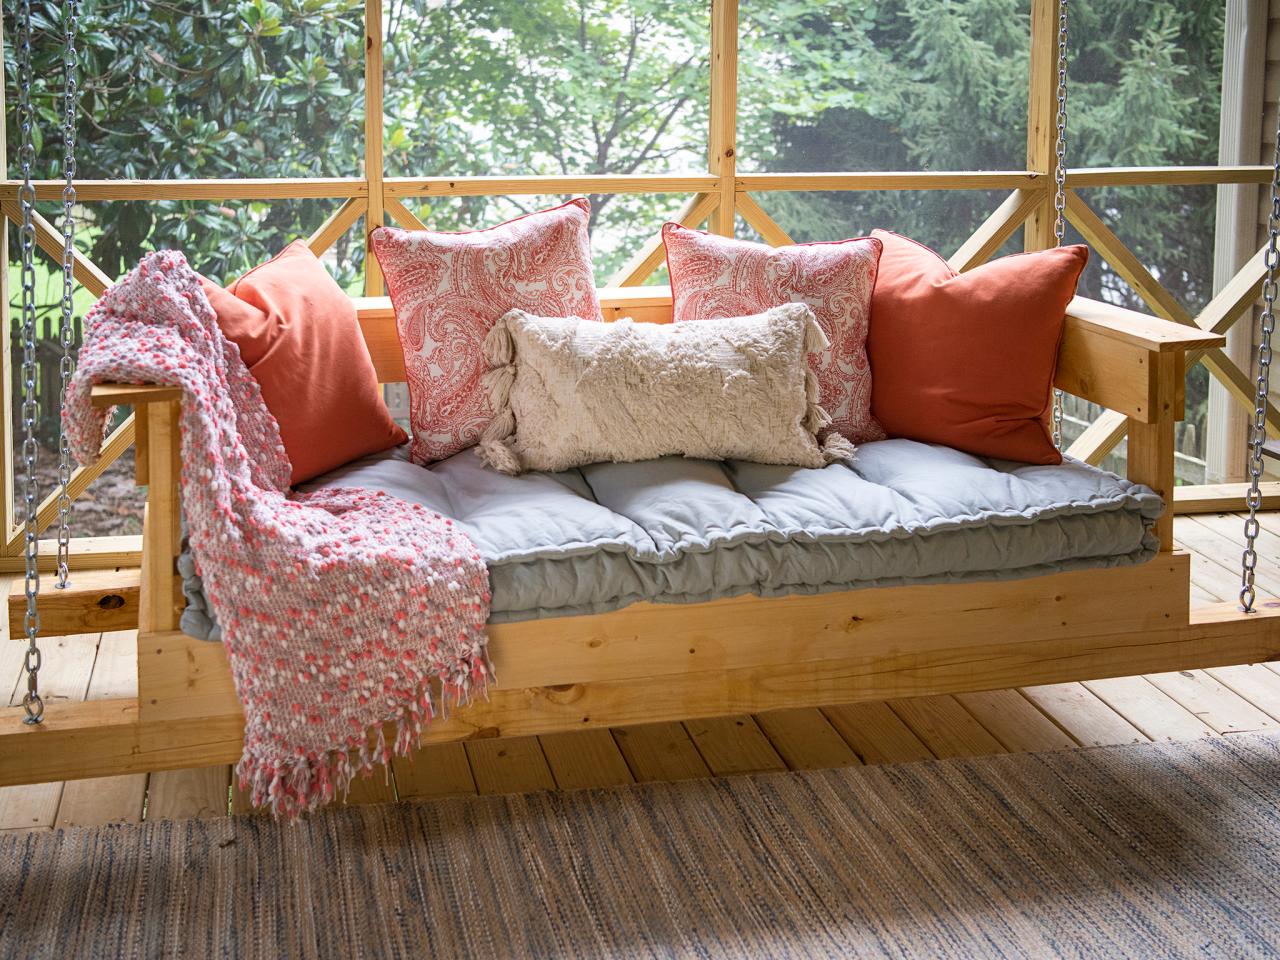 How To Build An Outdoor Daybed